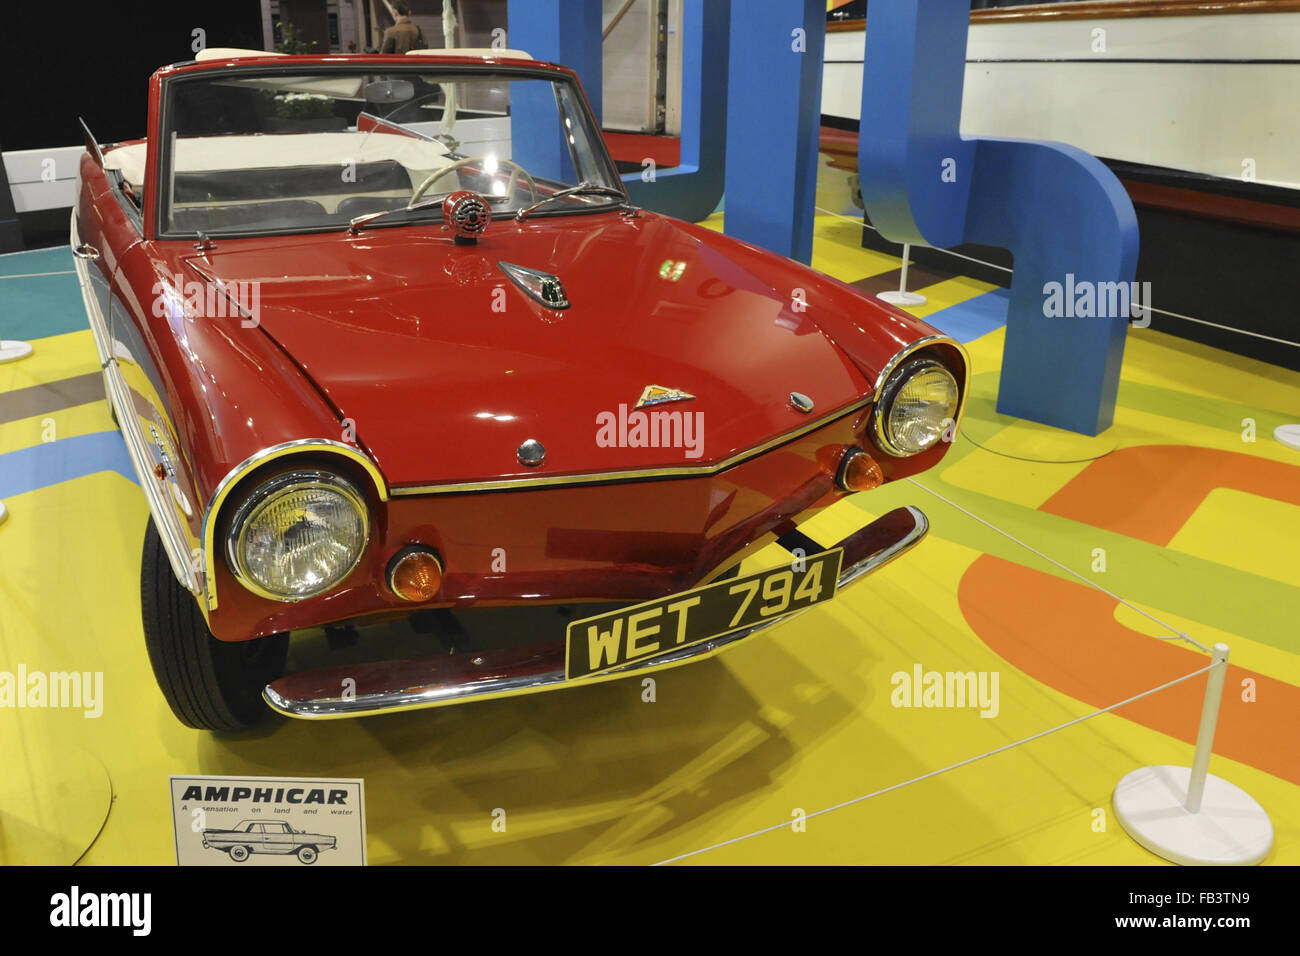 London, UK. 8th January, 2016. An Amphicar Model 770 on display at the London Boat Show at the ExCeL Exhibition Centre. The Amphicar was a German, amphibious automobile produced between 1959-1968. Credit:  Michael Preston/Alamy Live News Stock Photo